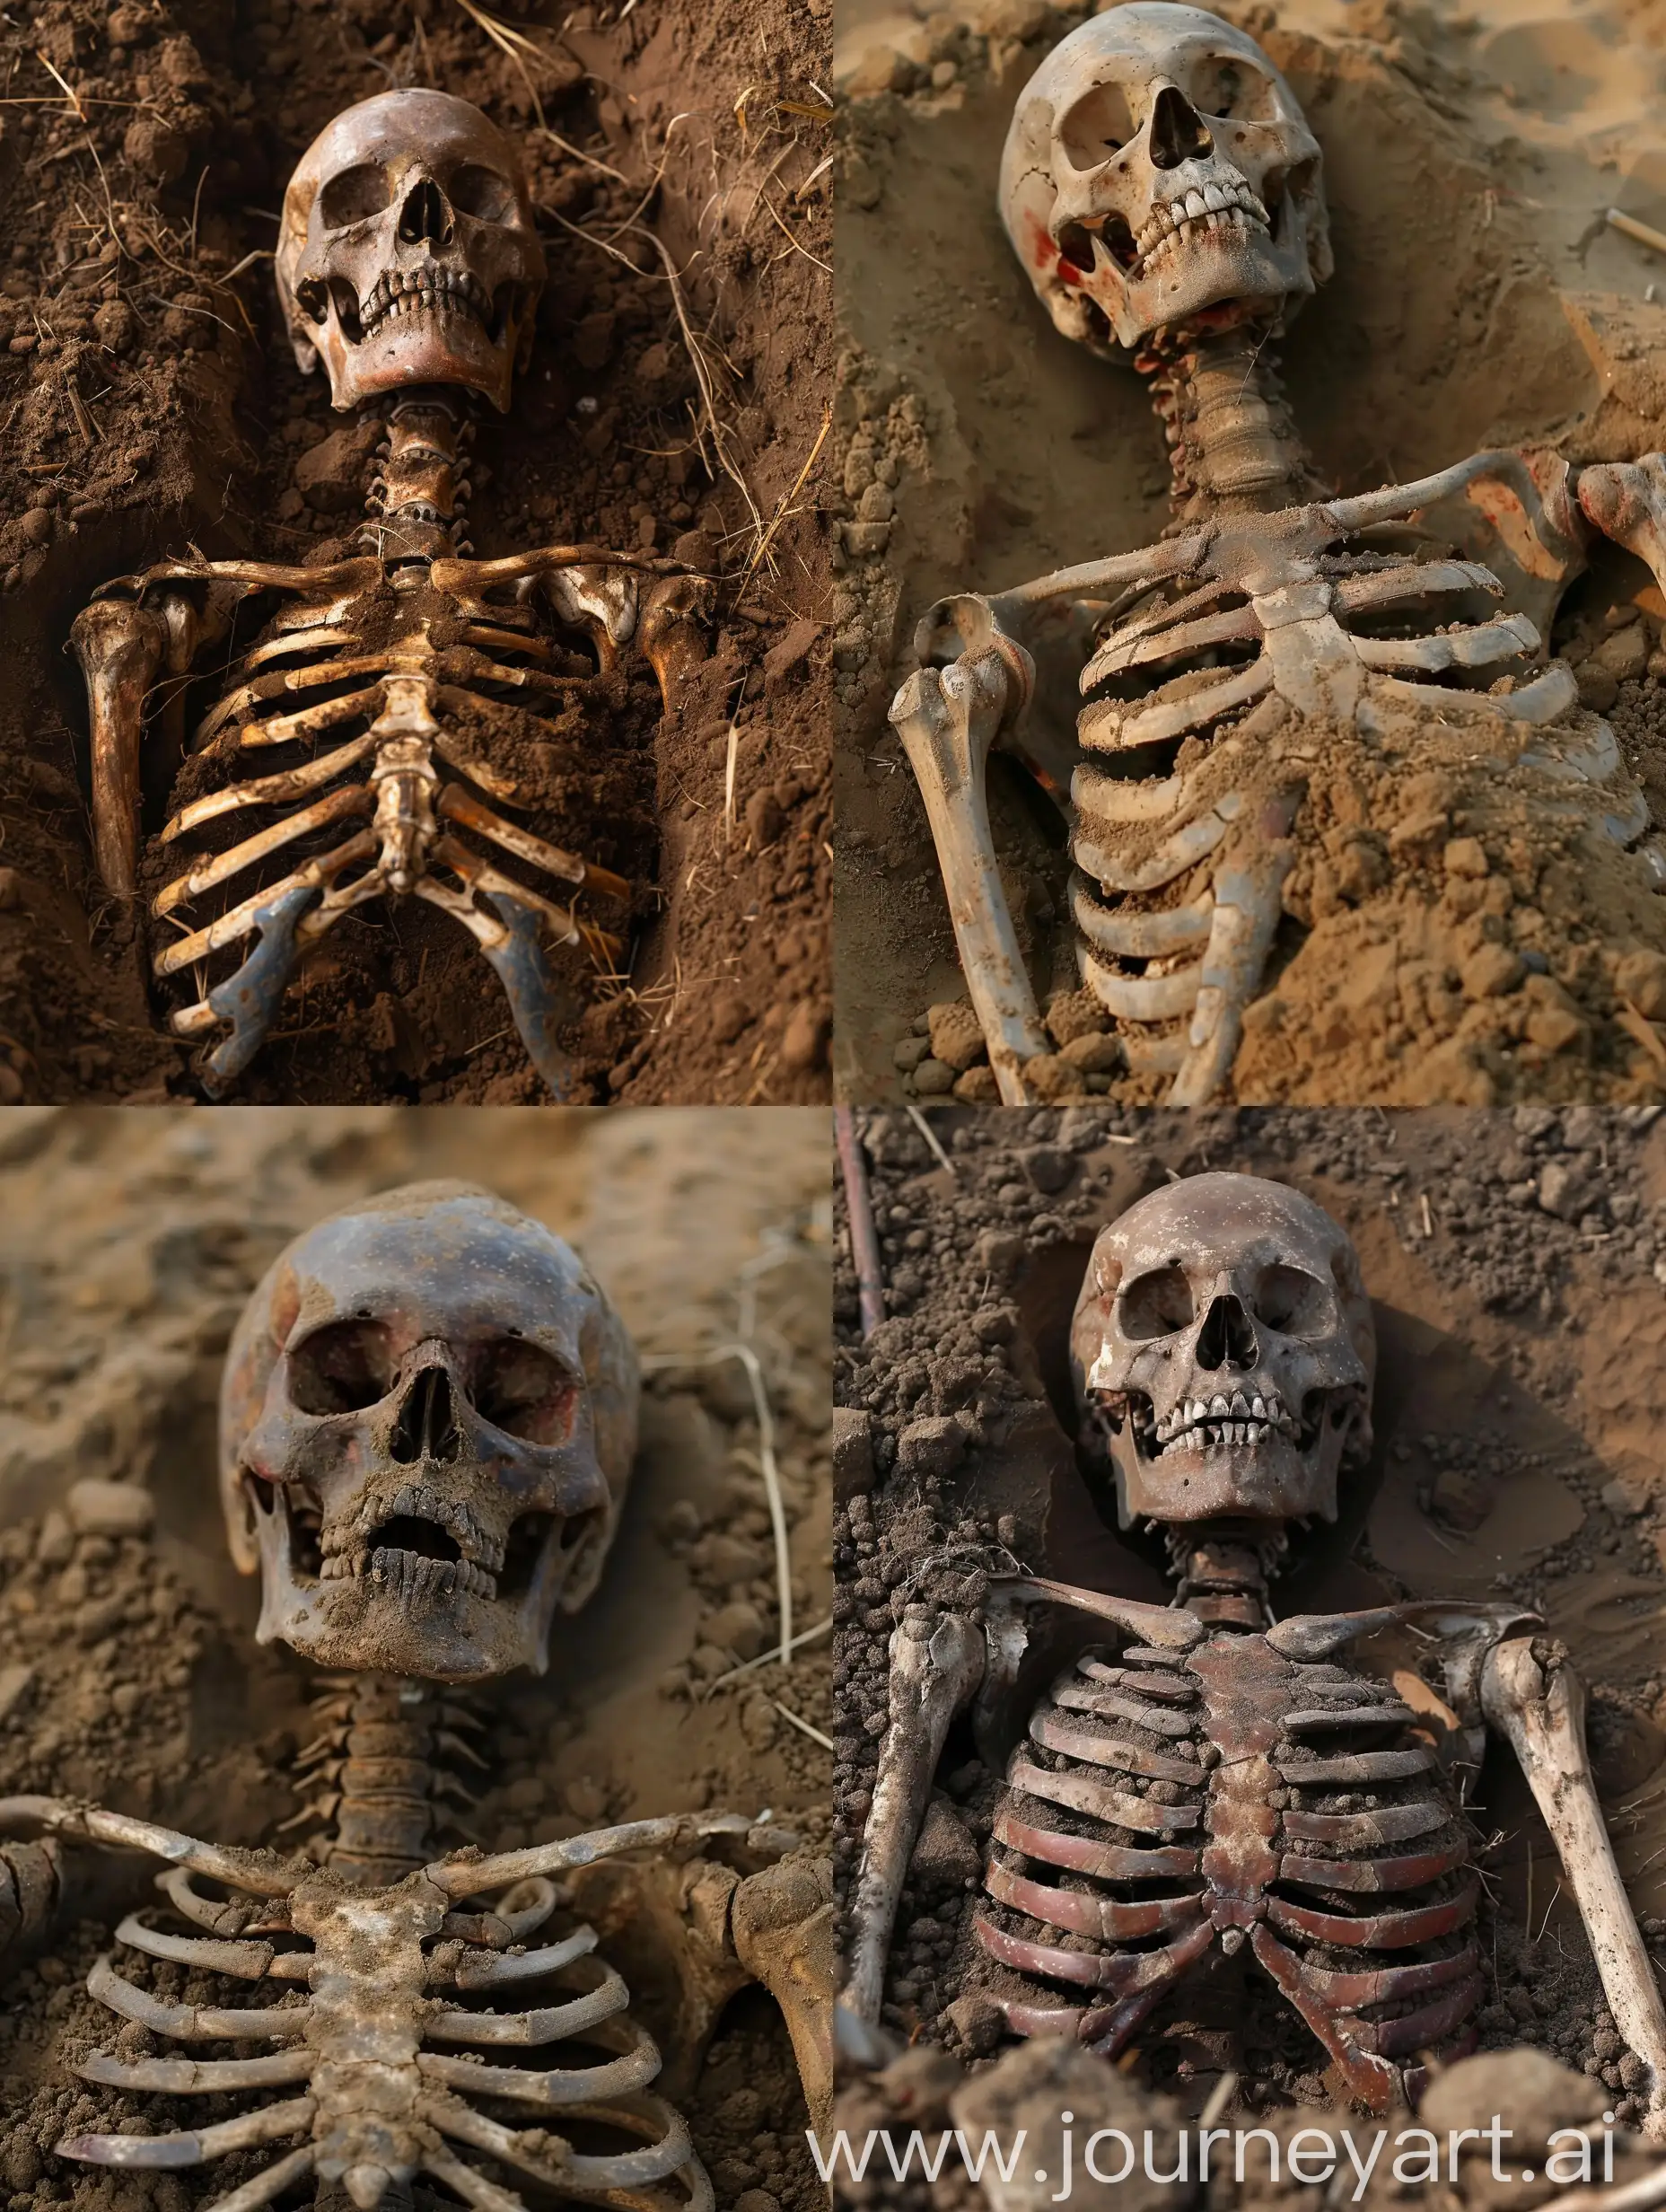 Medieval-Skeleton-Unearthed-Amidst-Ancient-Ruins